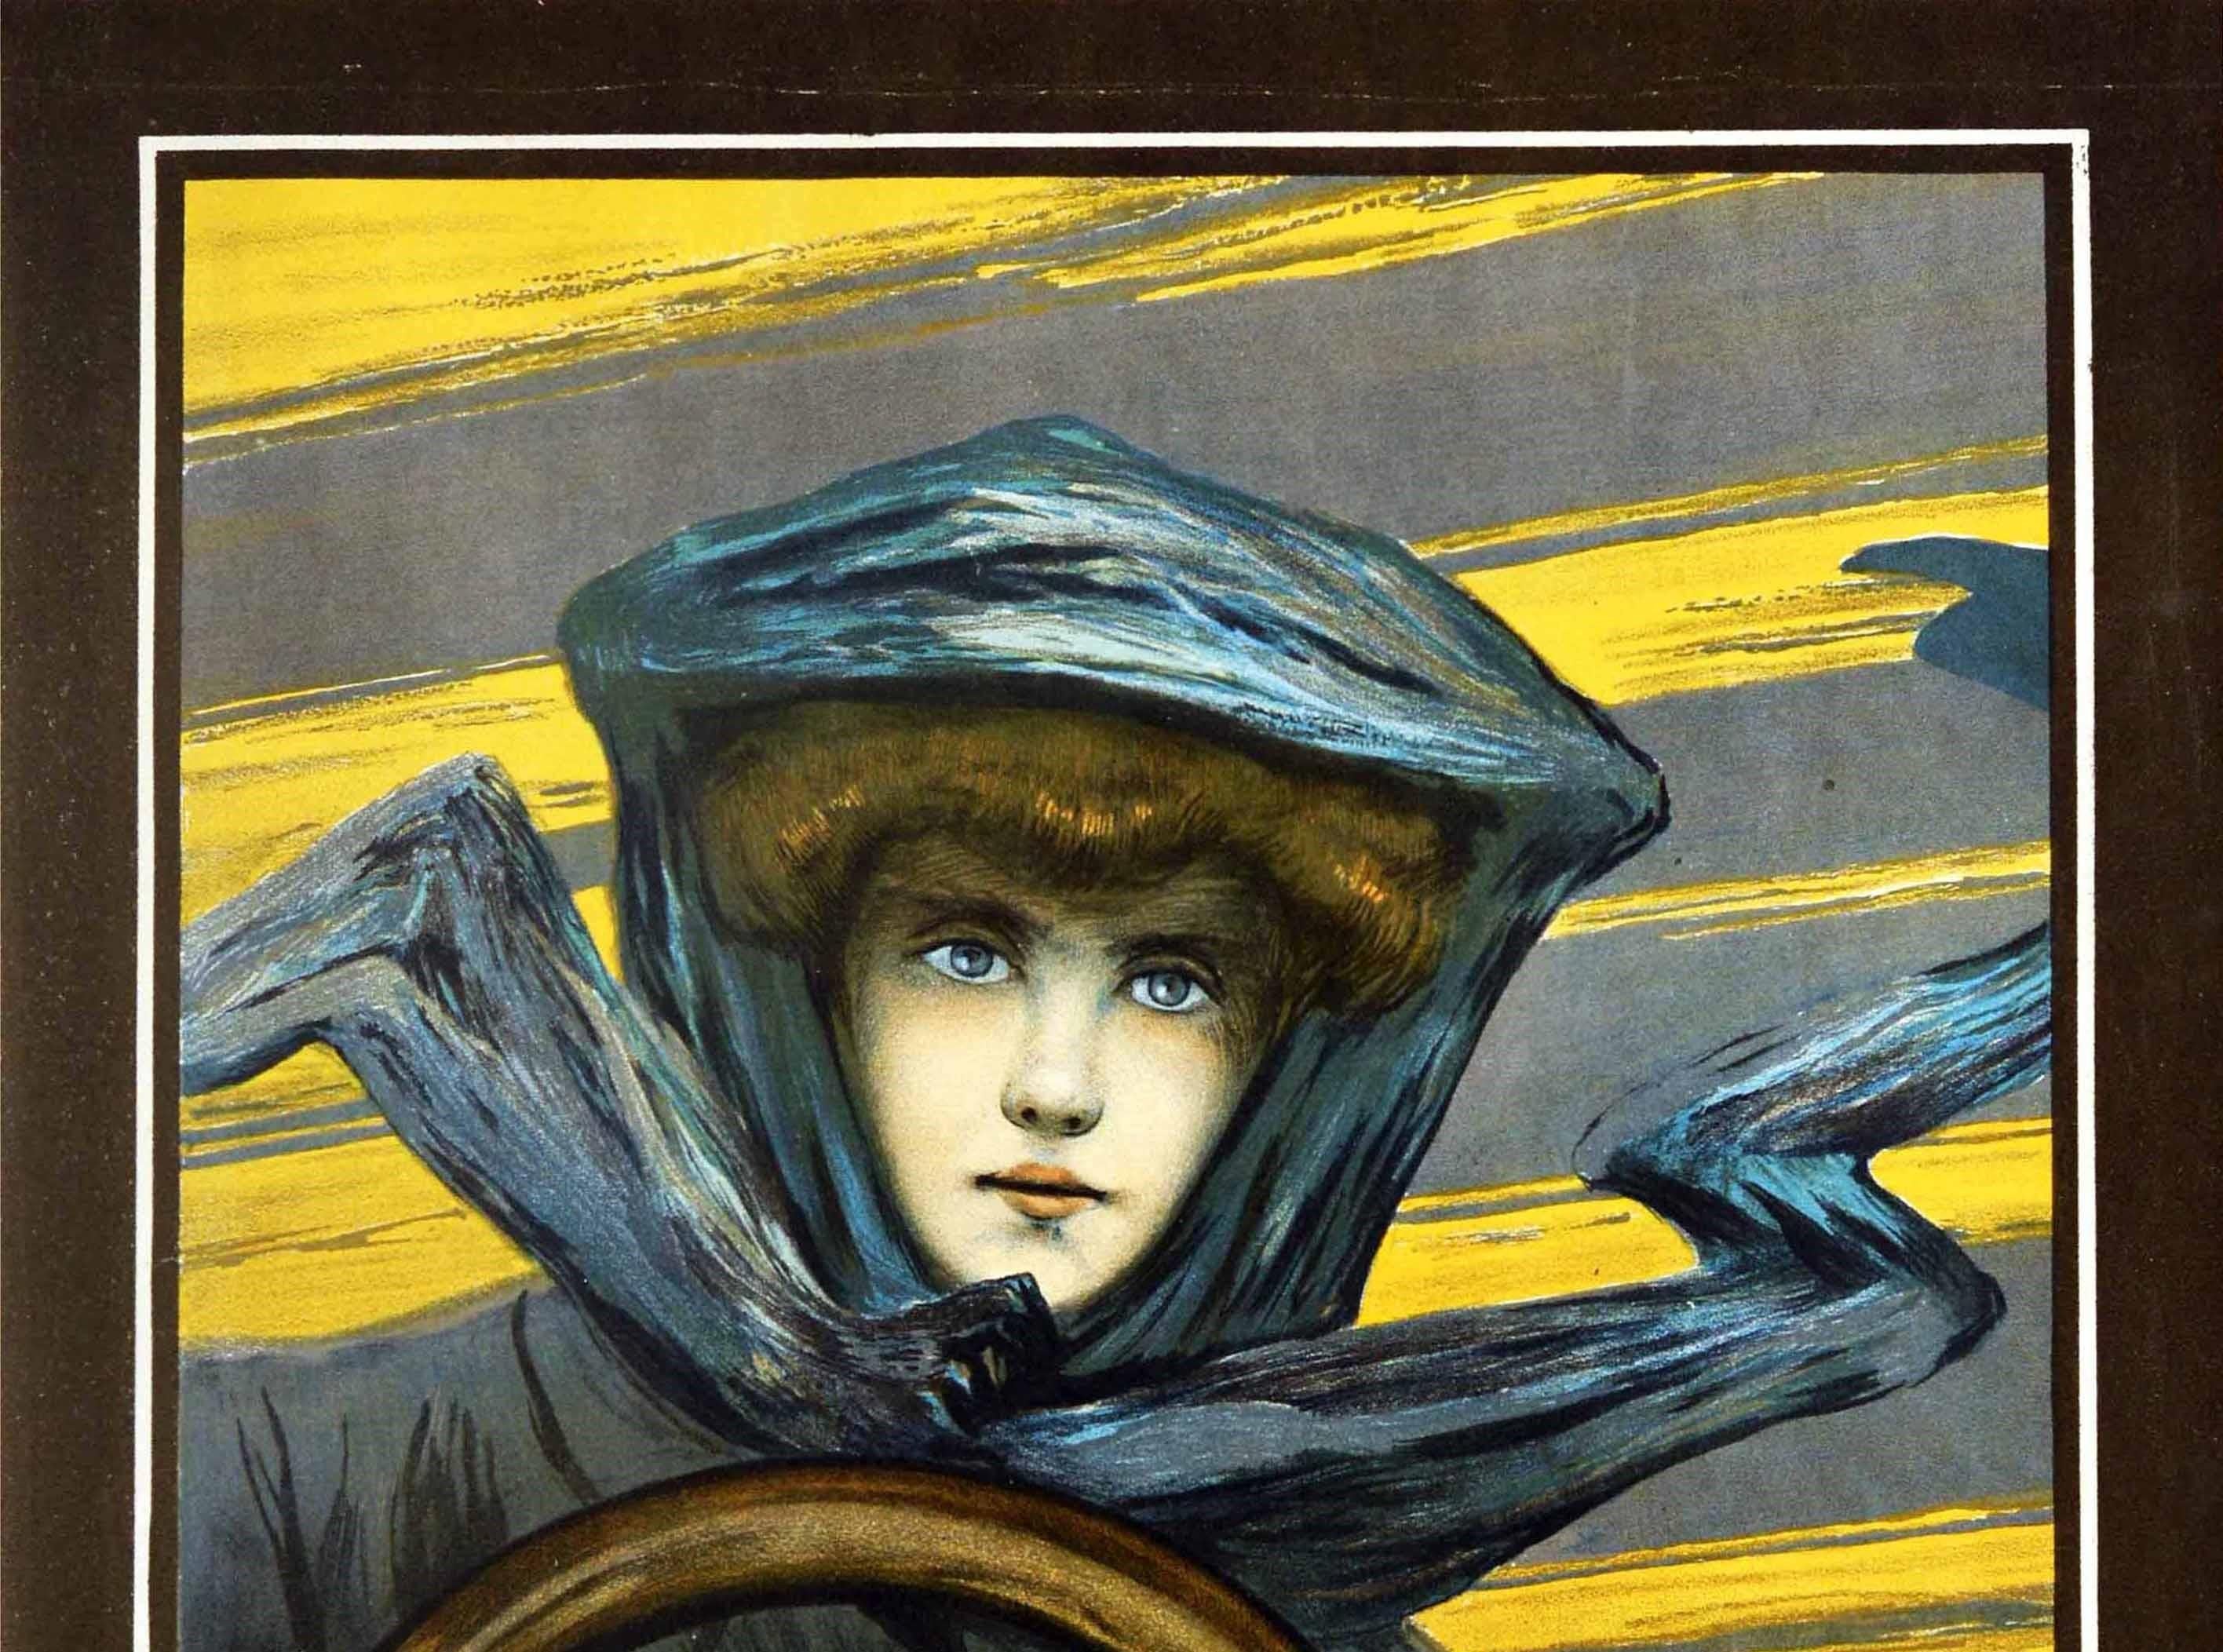 Original antique advertising poster featuring an Art Nouveau style depiction of a lady with blue eyes wearing a coat and driving gloves holding a car wheel, her headscarf on her hat fluttering in the wind as she looks towards the viewer, driving